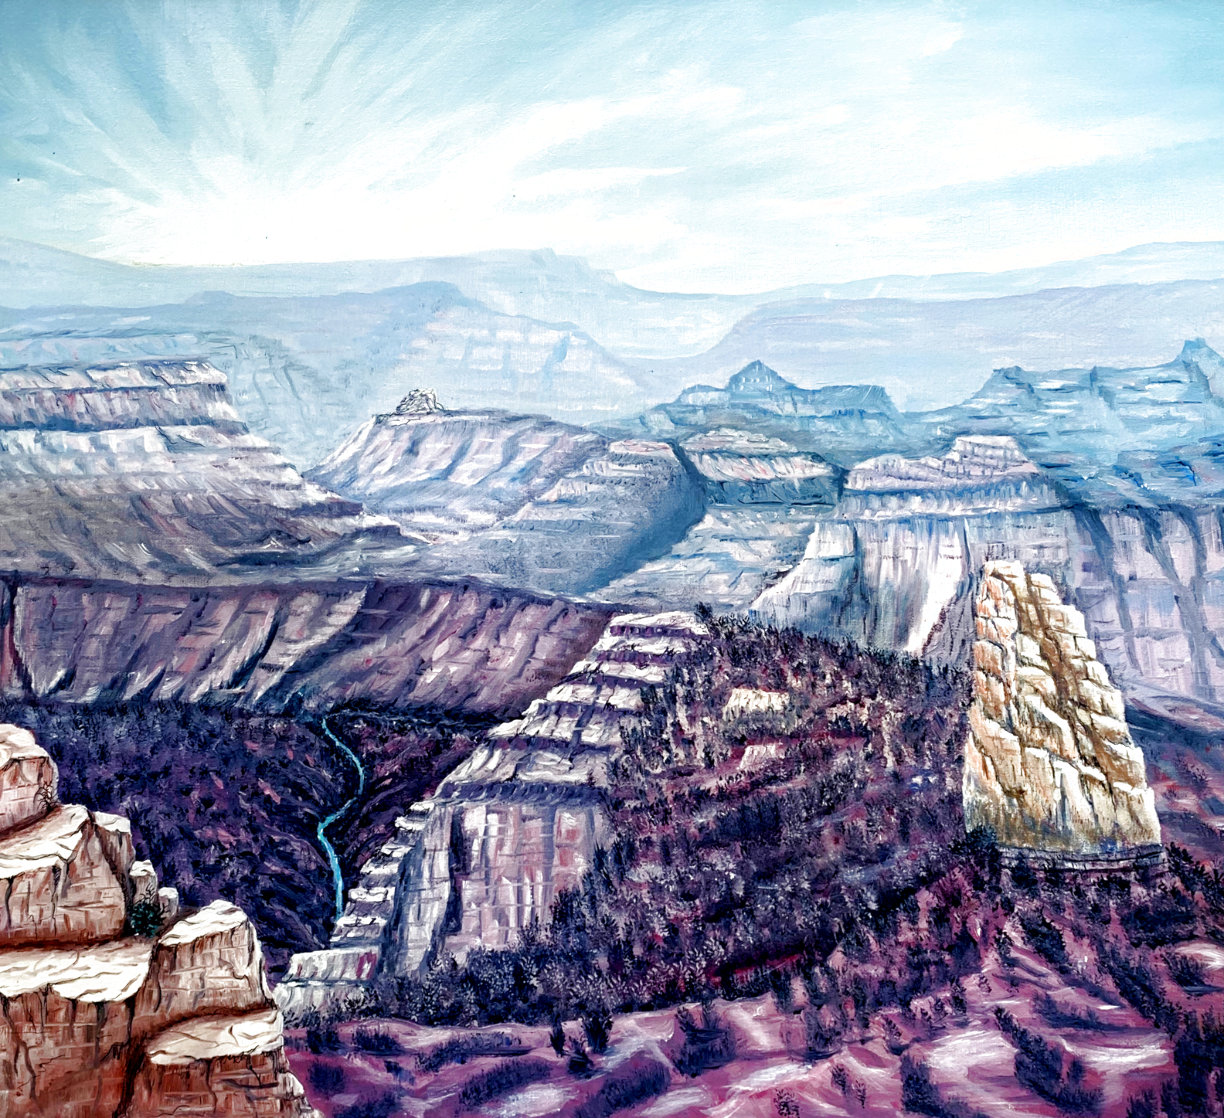 Mount Hayden From the Point Imperial North Rim of the Grand Canyon 1986 25x31 Original Painting by Armin Widmer